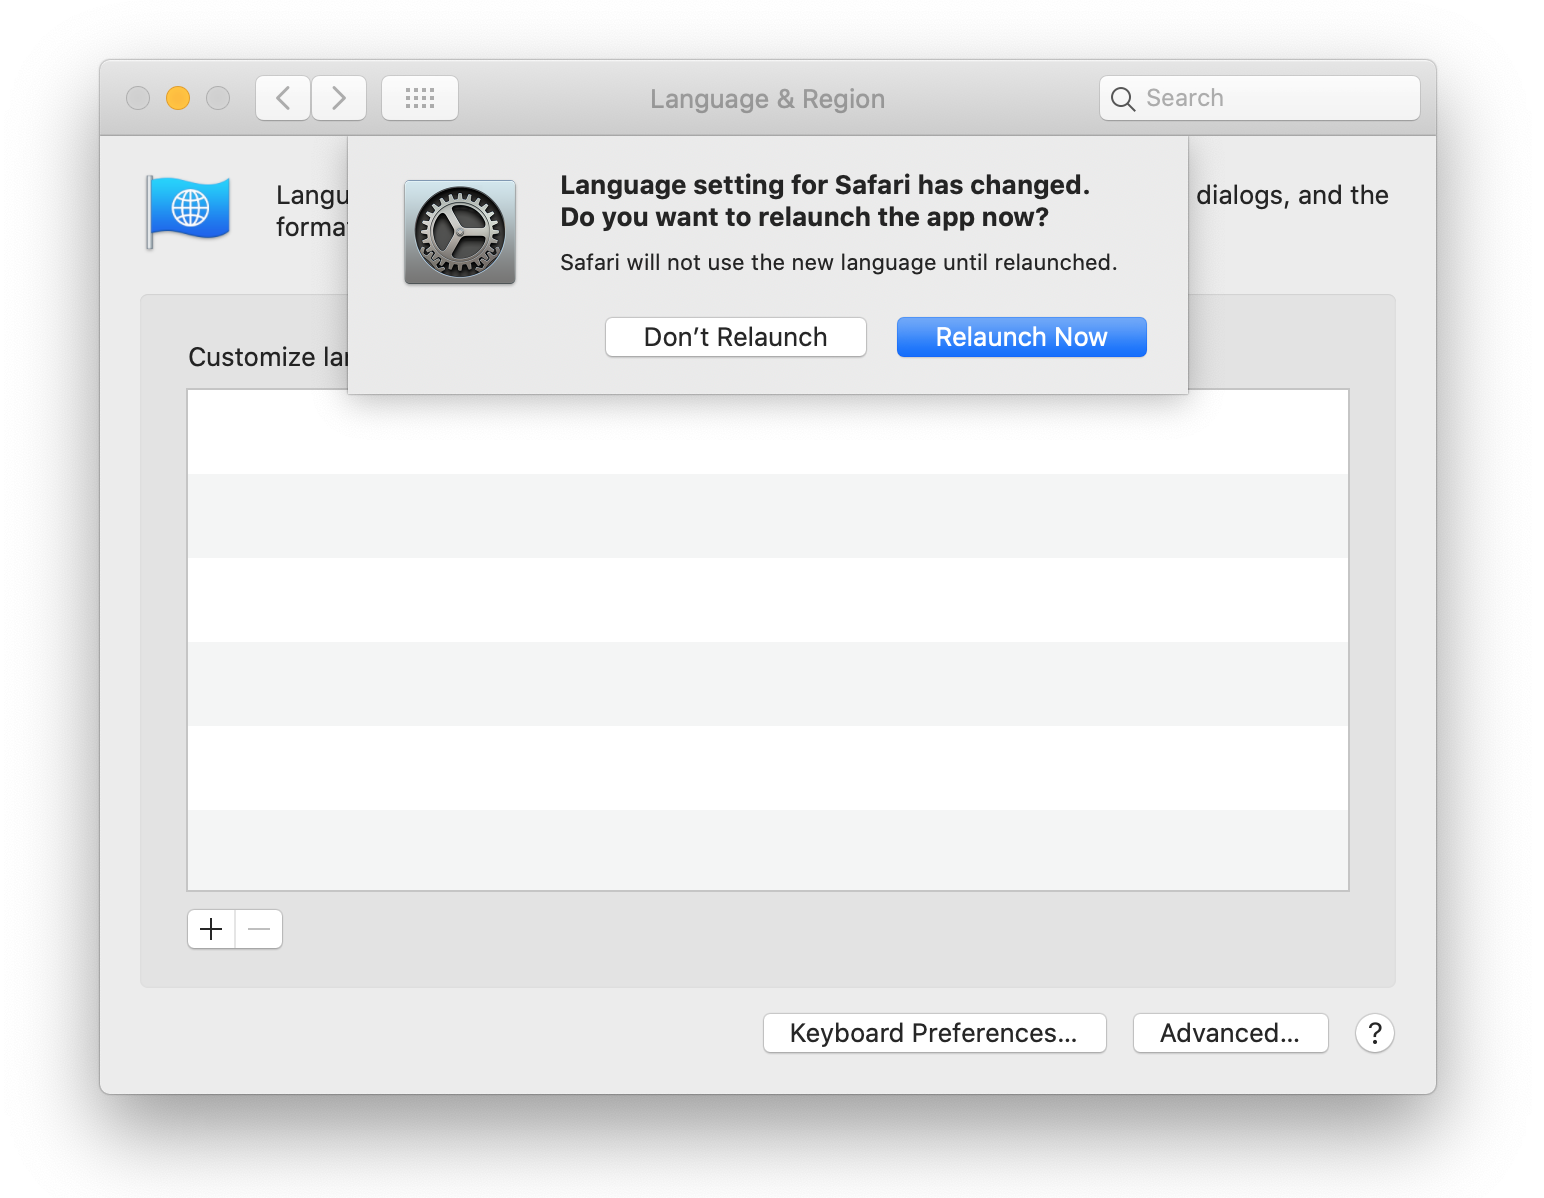 A screenshot of the Mac Language & Region settings open and a window with a message indicating that the language settings for Safari have changed and confirming if the user wants to relaunch the app to applying the new settings. The window includes a Don't Relaunch and a Relaunch Now button.